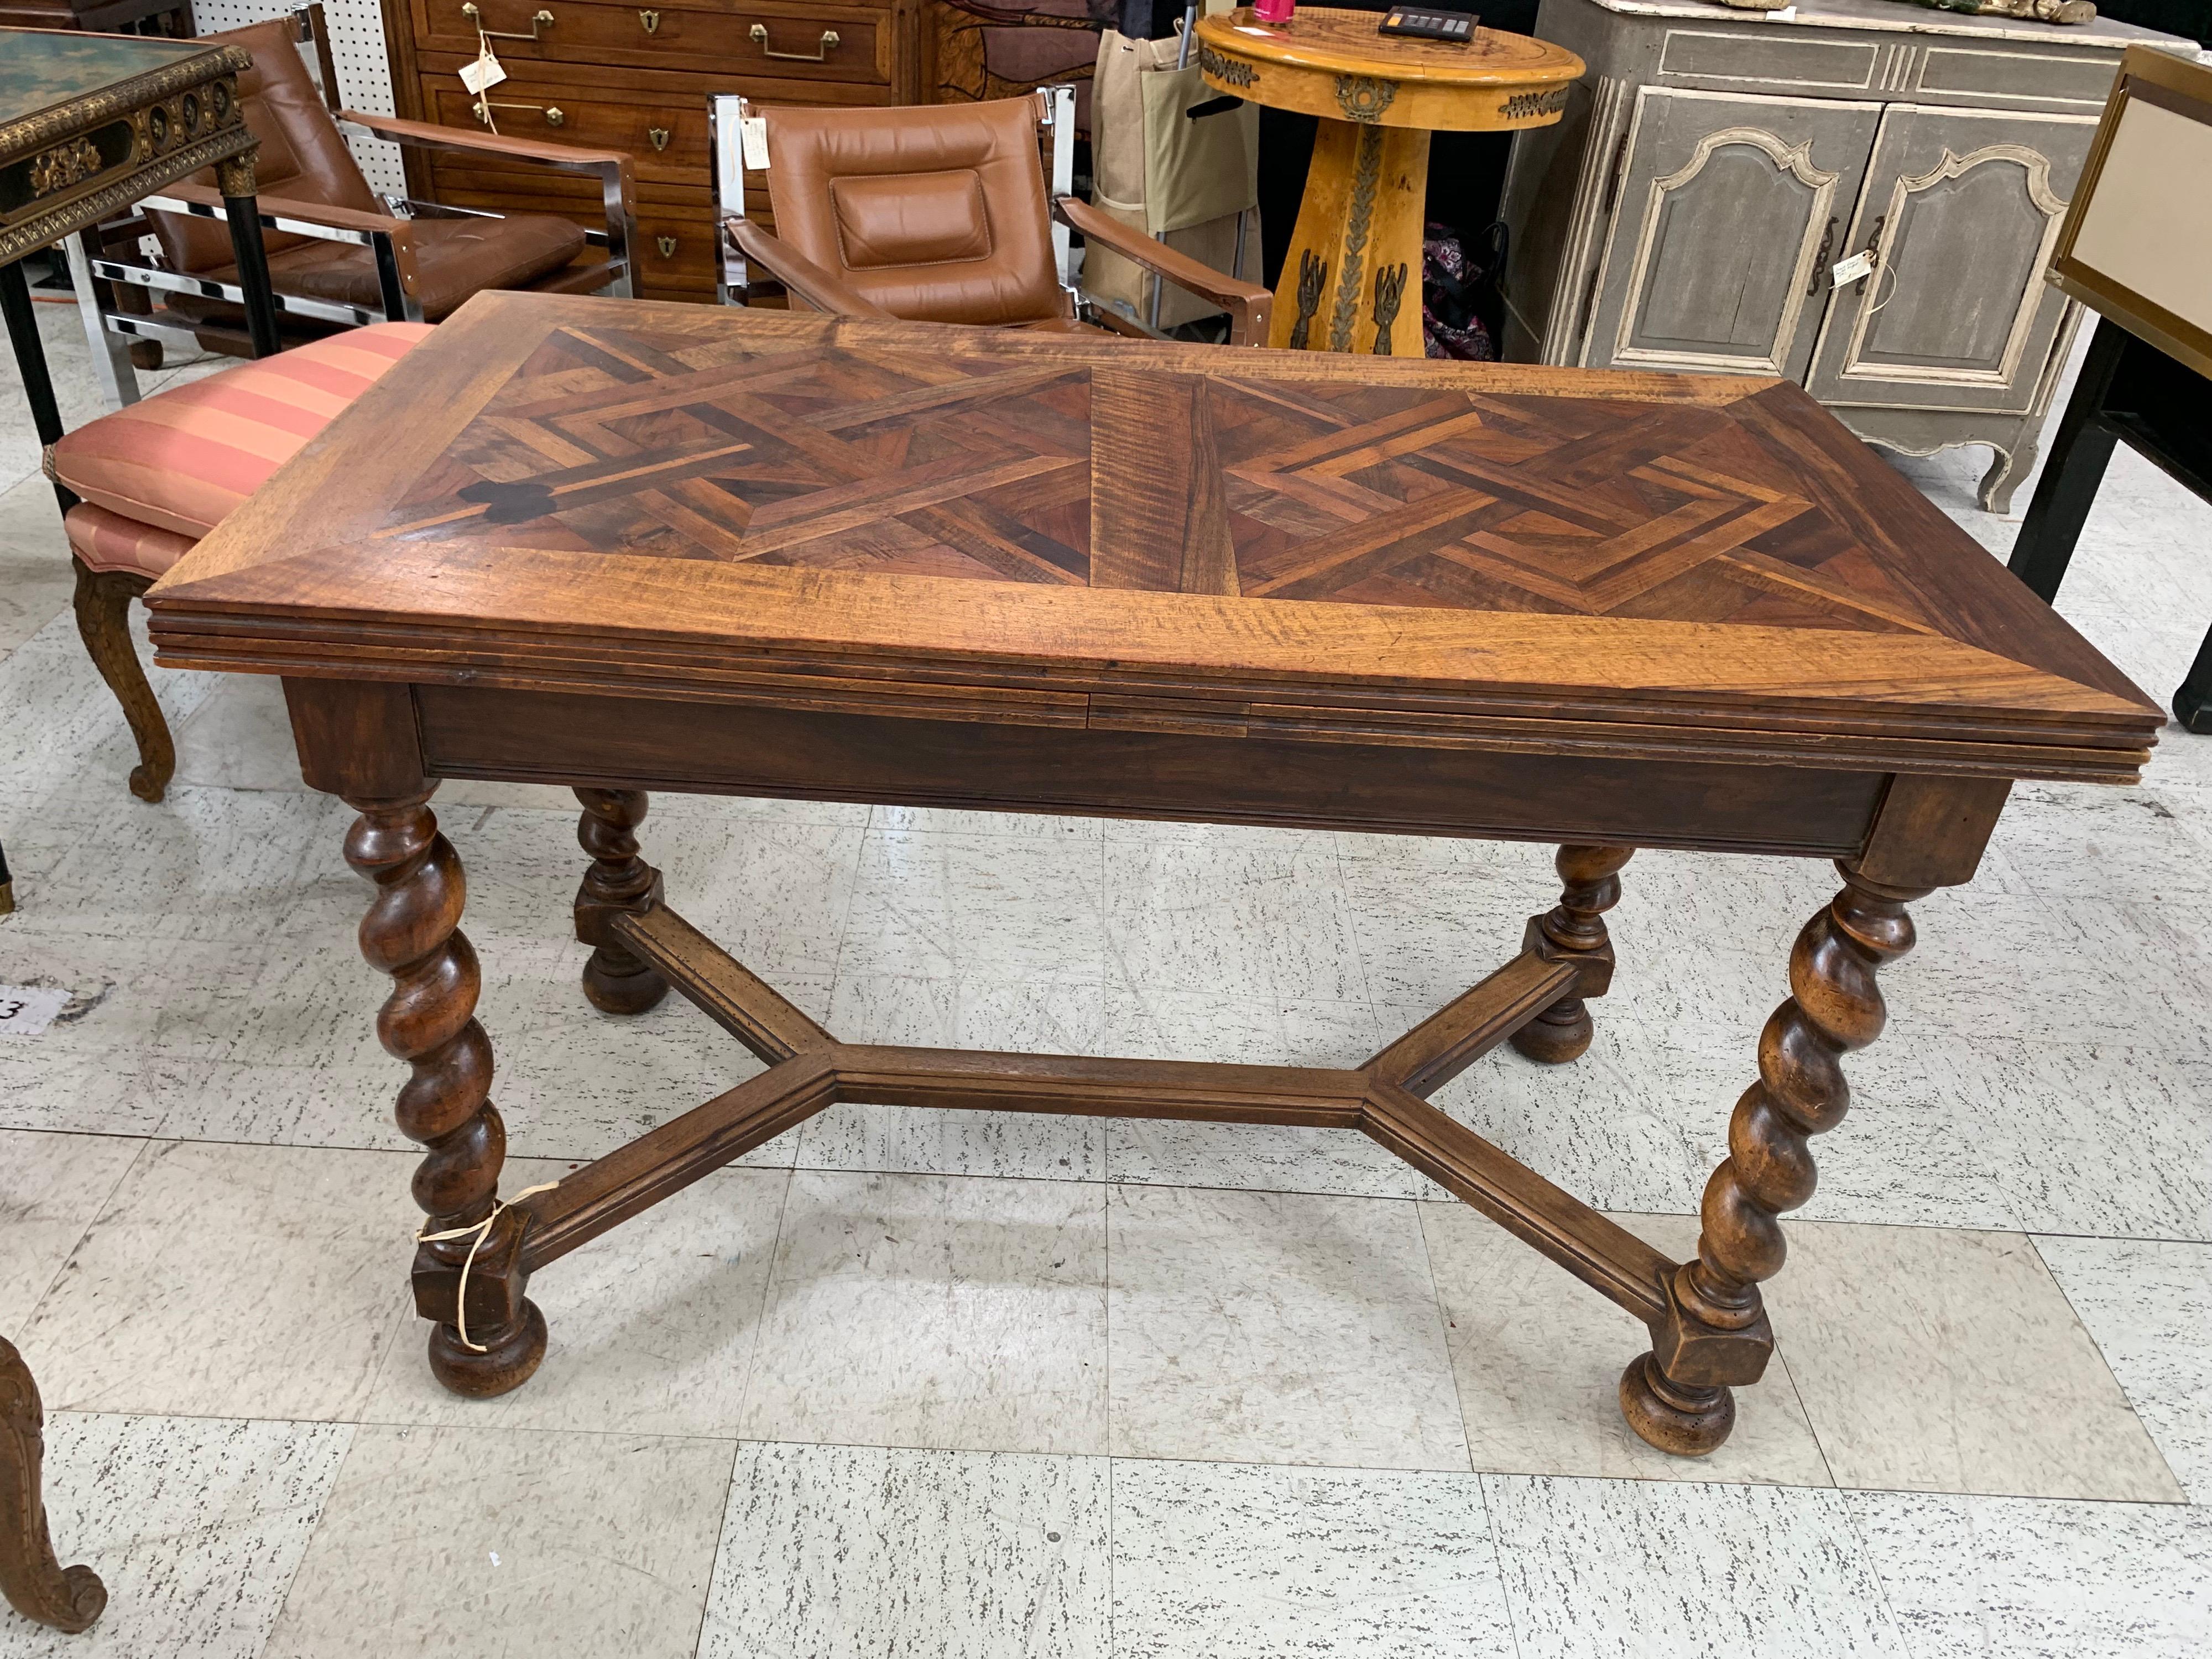 French walnut pull out leaves table standing on barley twist legs and stretcher.
It could be used as a sofa table, desk or dining table. 
The 2 leaves are 21 1/2 in. long which makes the length with leaves pulled out 90 inches